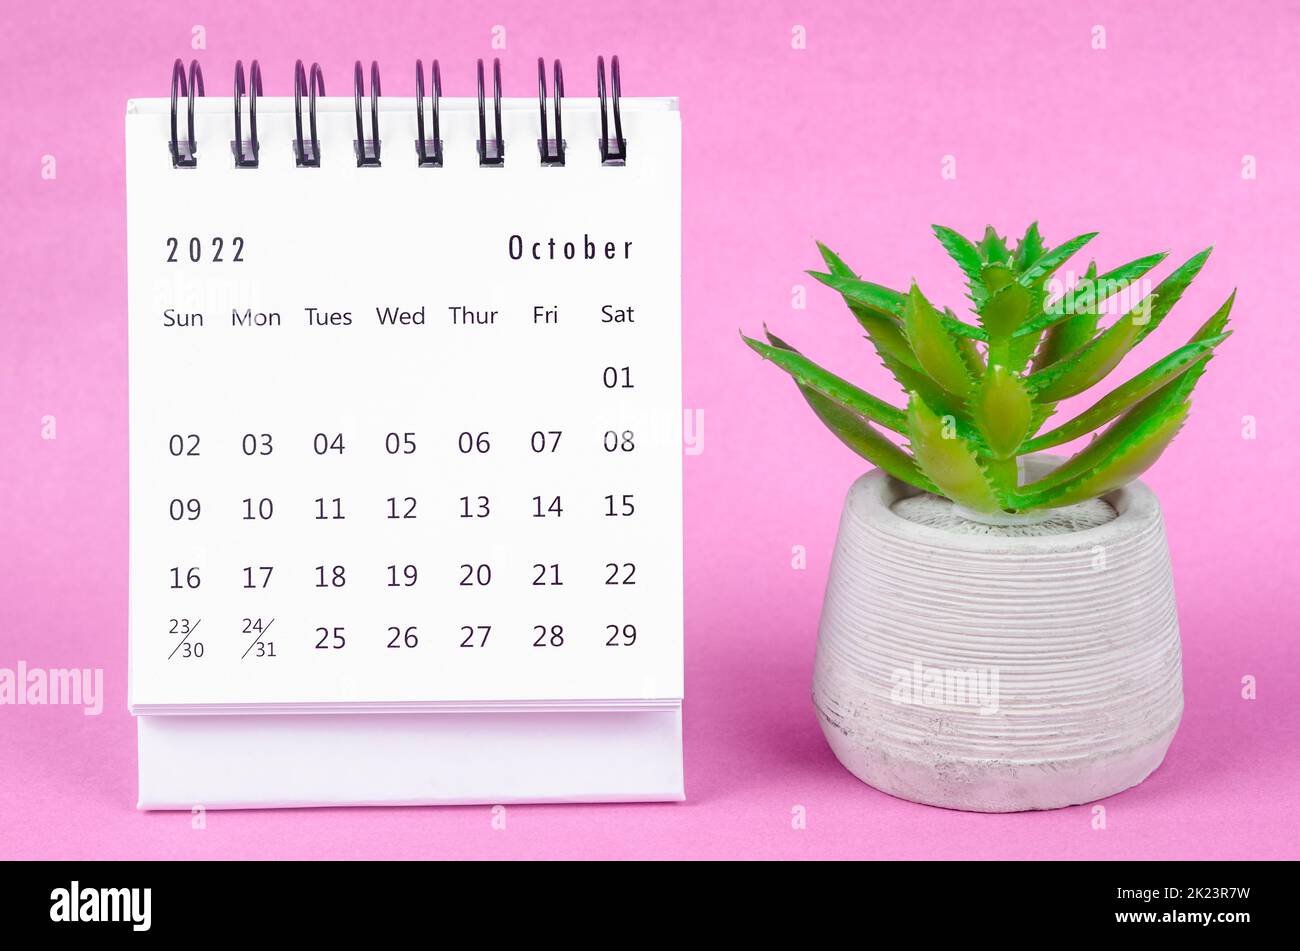 October 2022 Monthly desk calendar for 2022 year with plant pot on pink background. Stock Photo